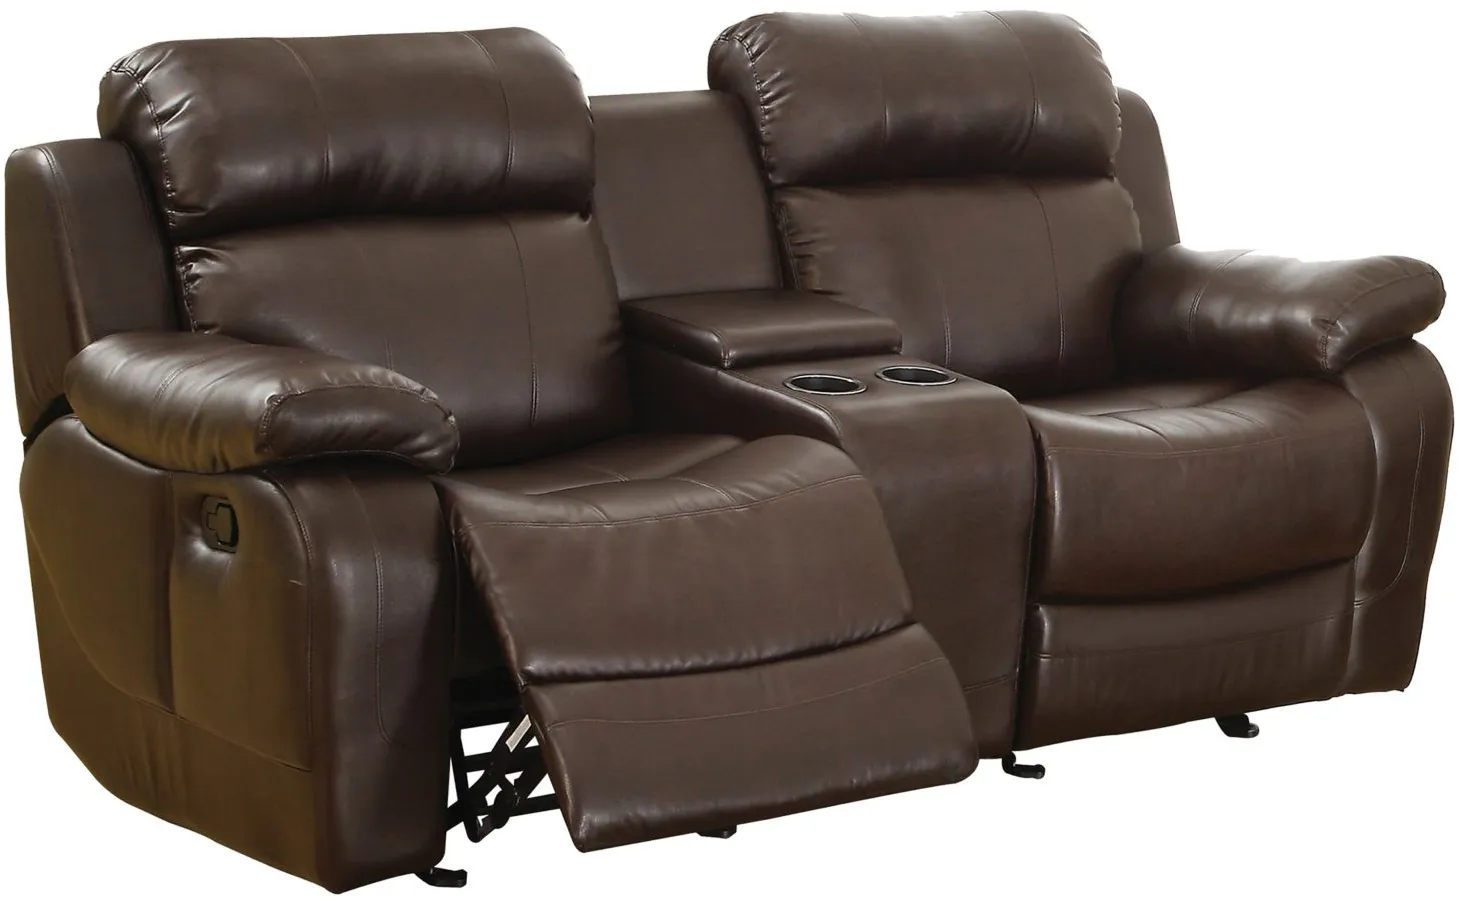 Dwyer Double Glider Reclining Love Seat with Center Console in Brown by Homelegance